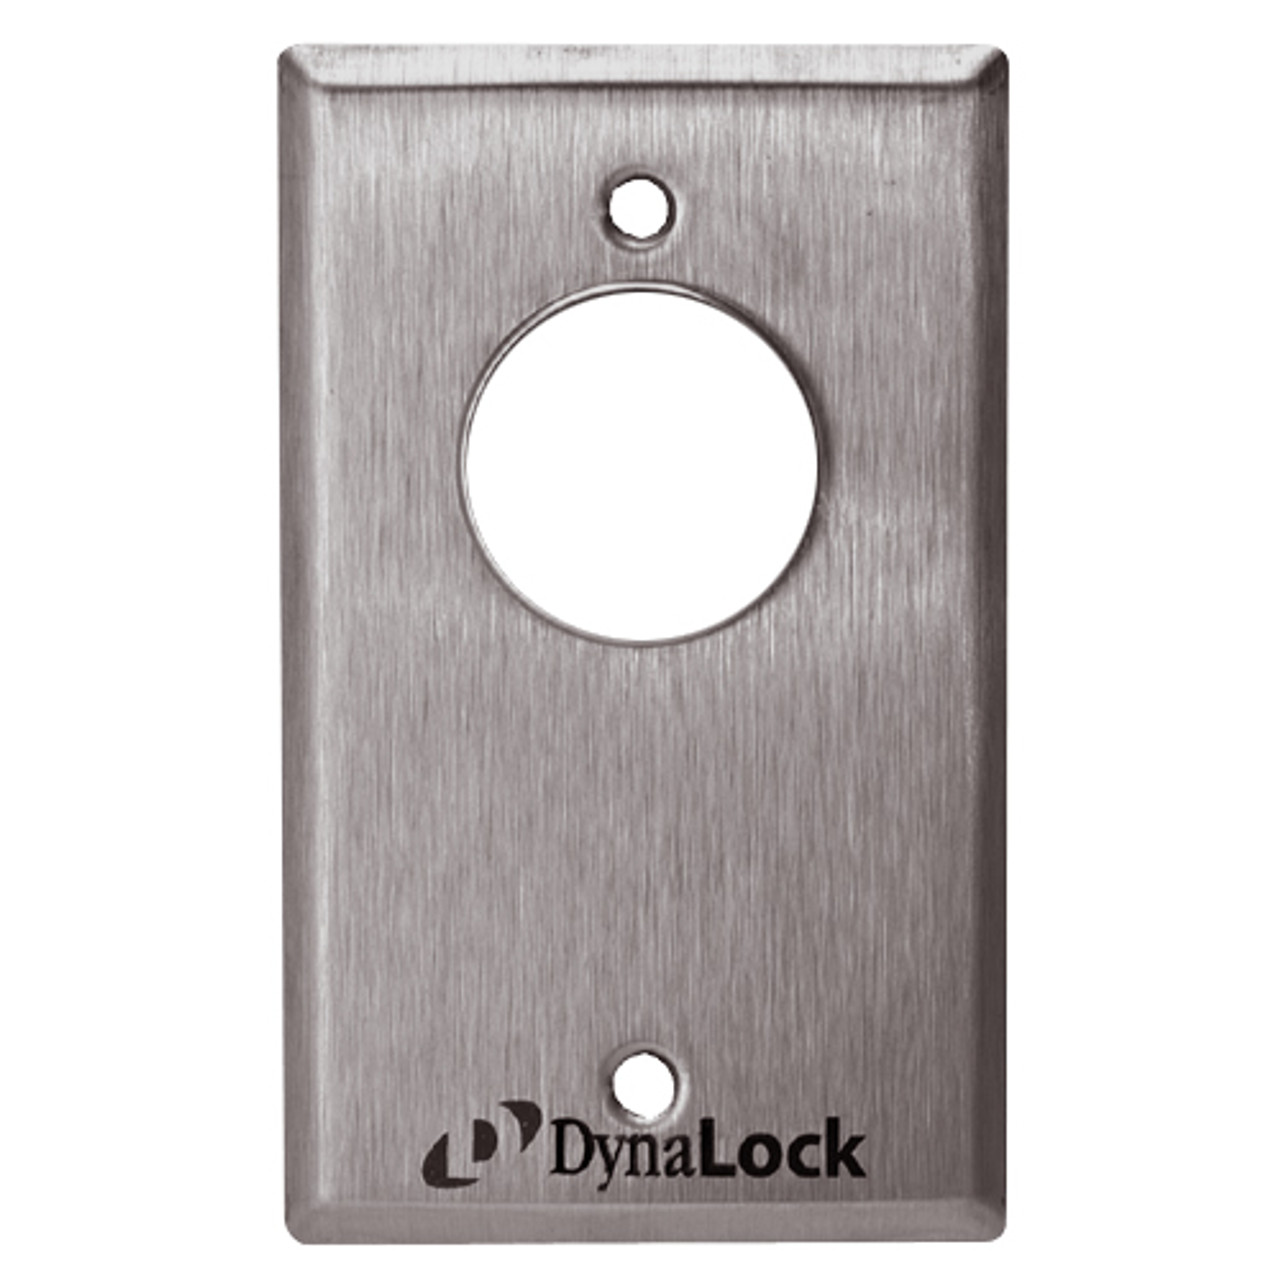 7002-US32D-LED DynaLock 7000 Series Keyswitches Momentary 1 Single Pole Double Throw with Bi-Color LED in Satin Stainless Steel